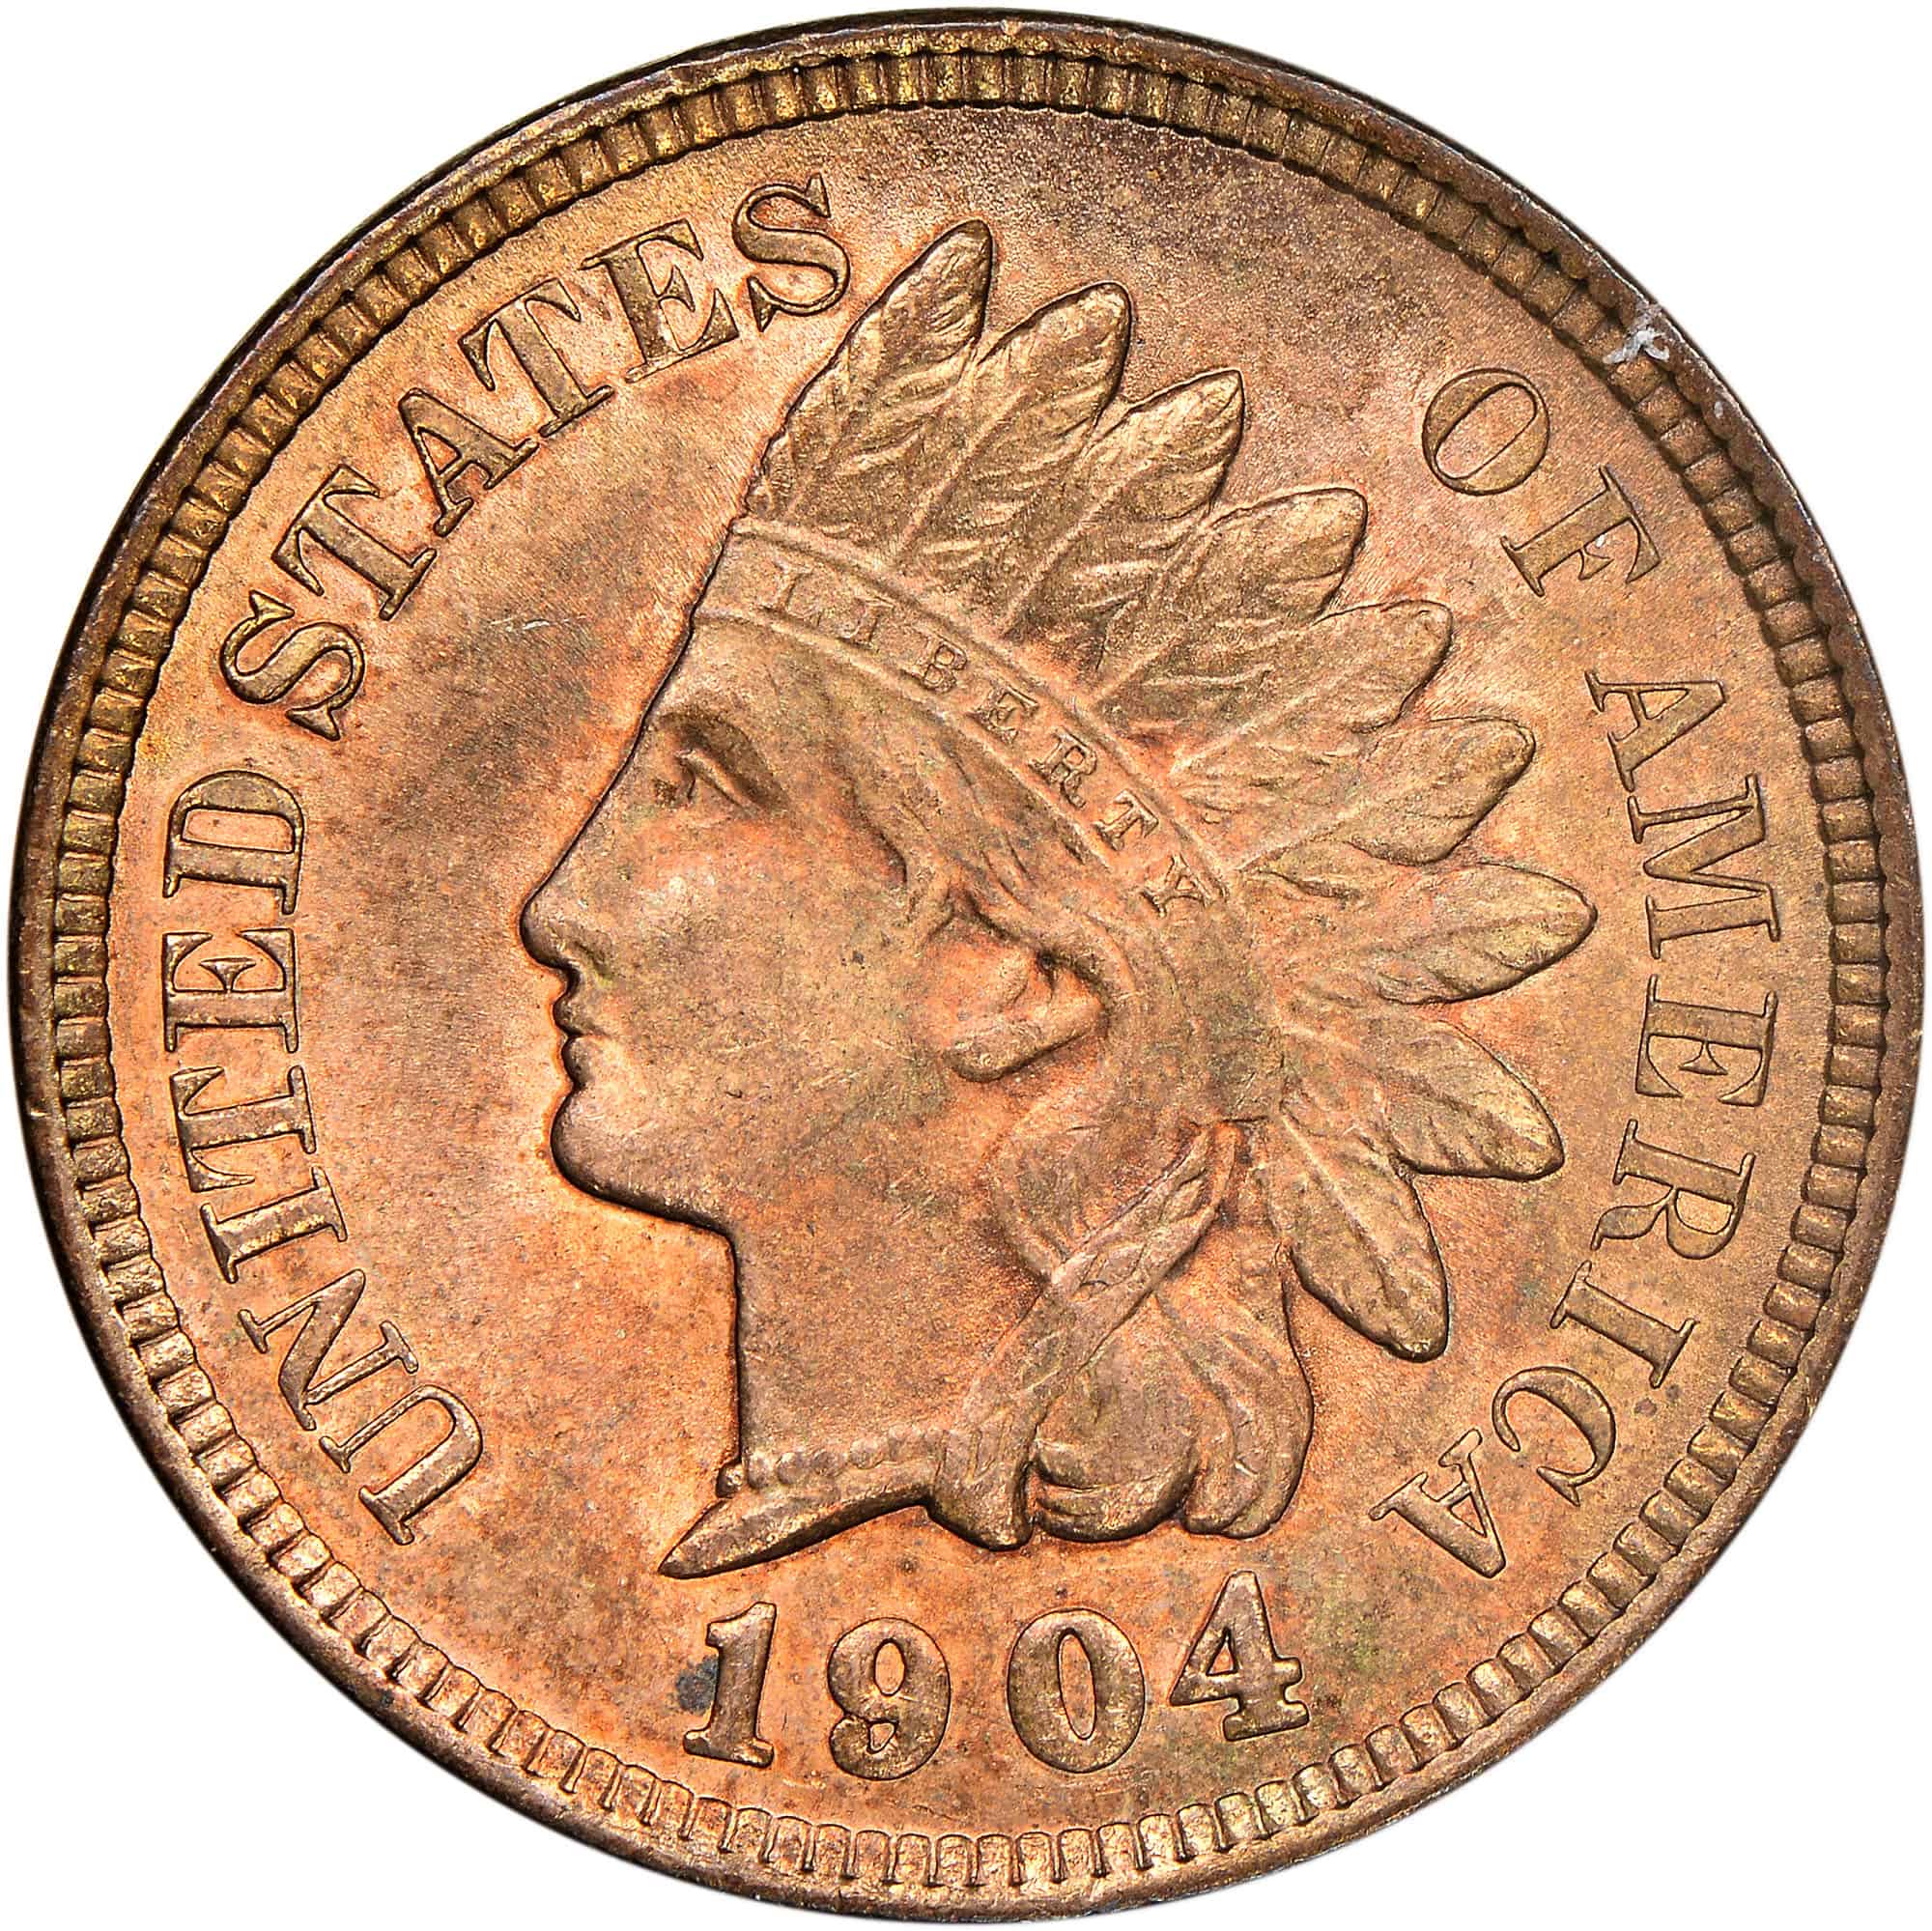 The Obverse of the 1904 Indian Head Penny